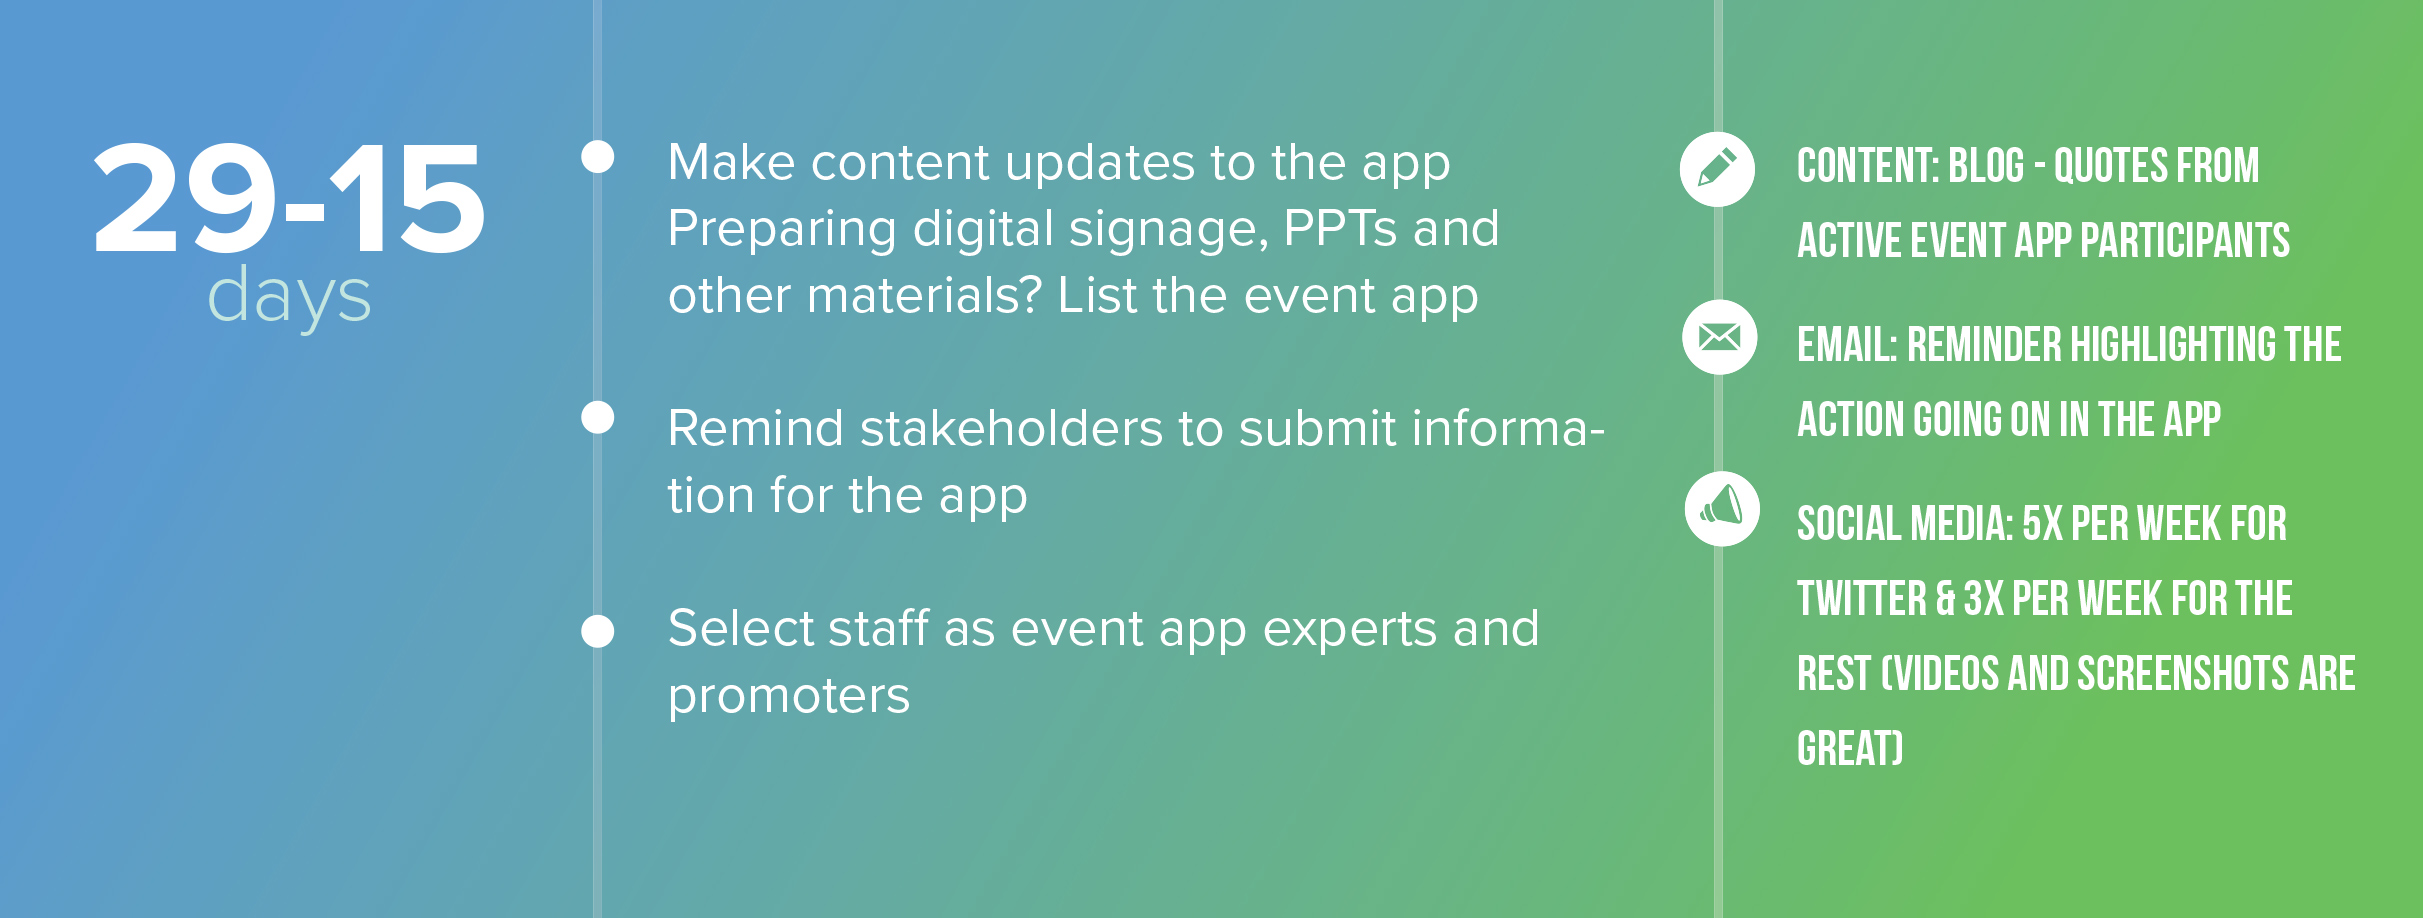 Event app marketing cheat sheet - 29 to 15 days before the event